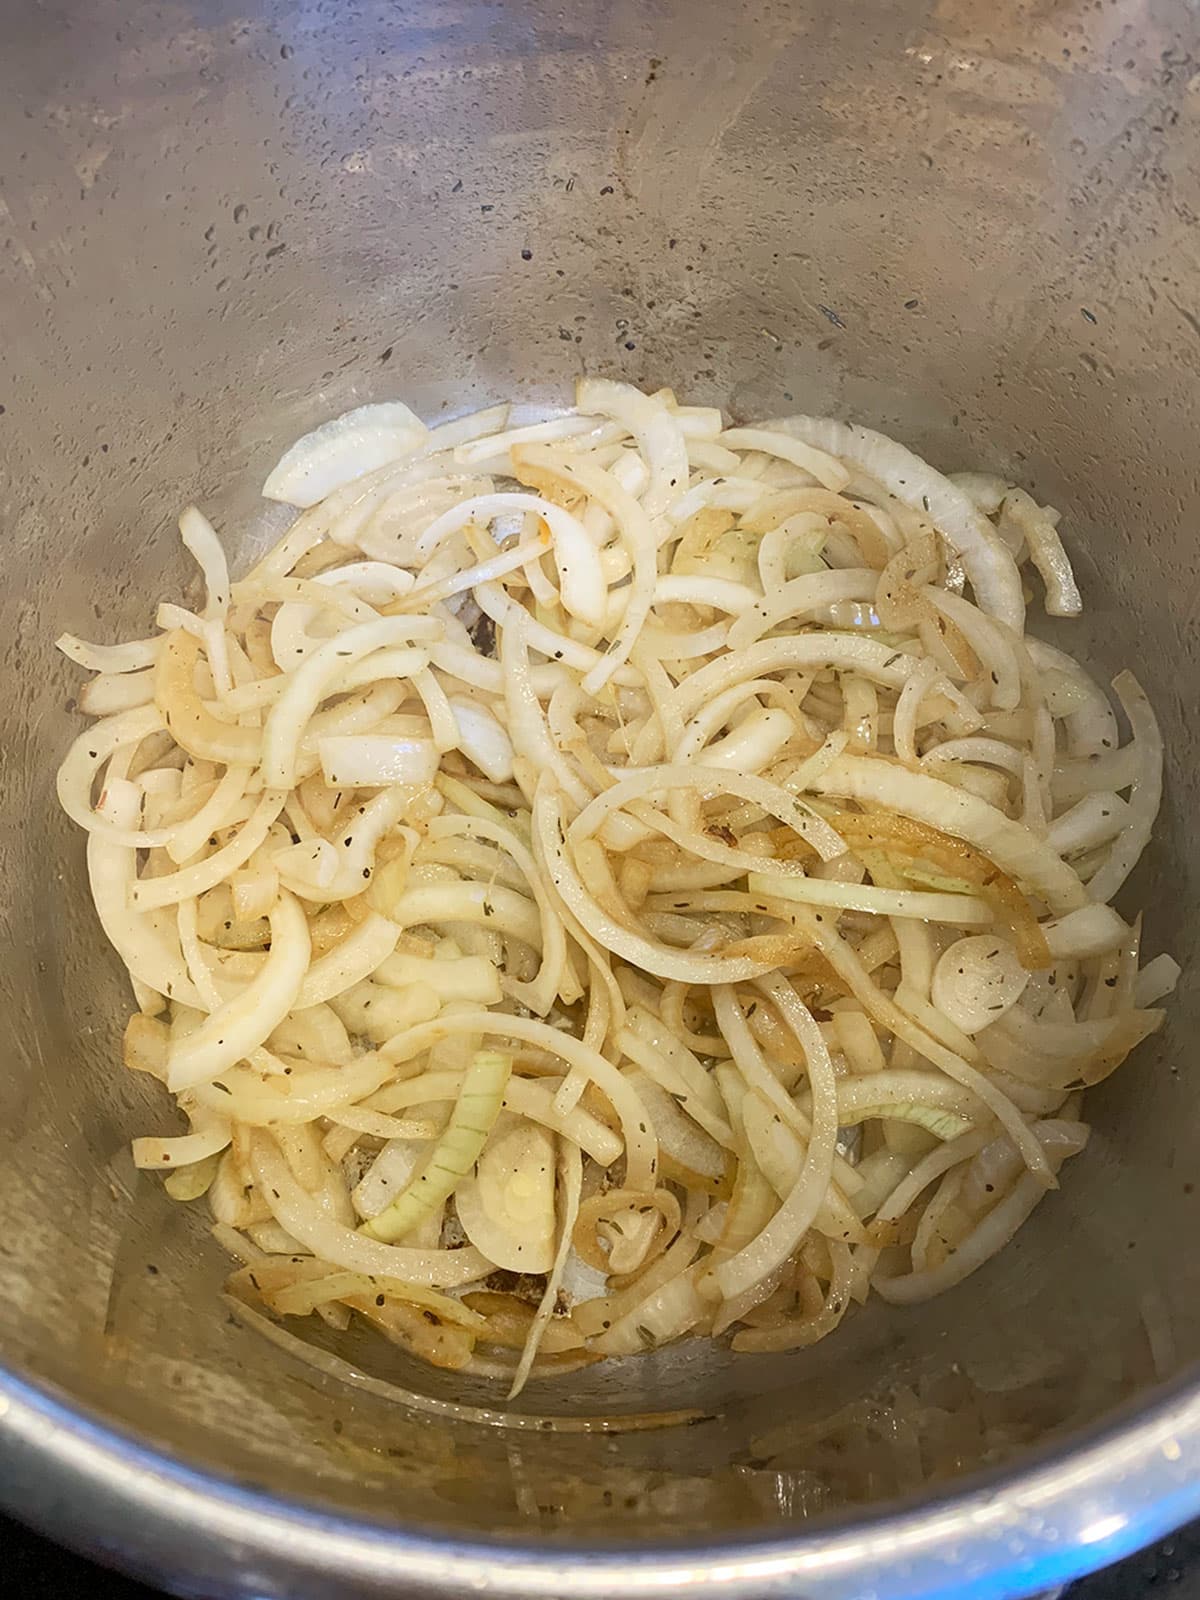 Onions for pressure cooker pomegranate brisket sauteing in the instant pot.